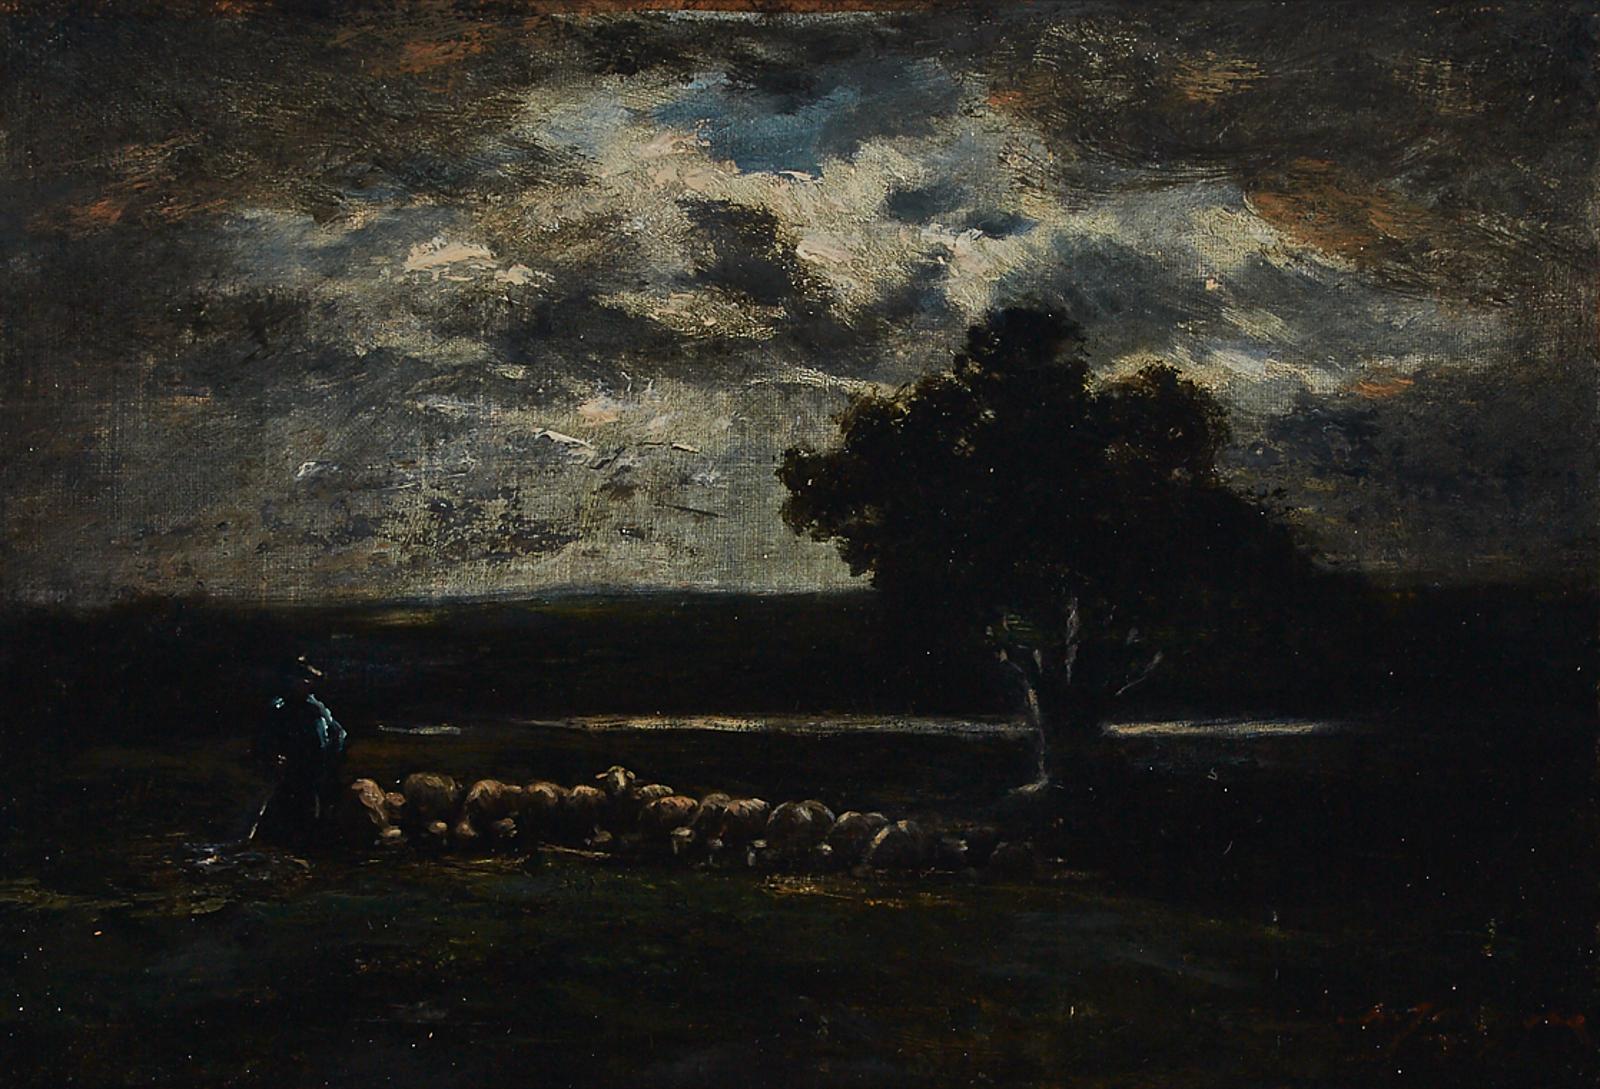 Charles Émile Jacque (1813-1894) - Sheep Herder In The Moonlight